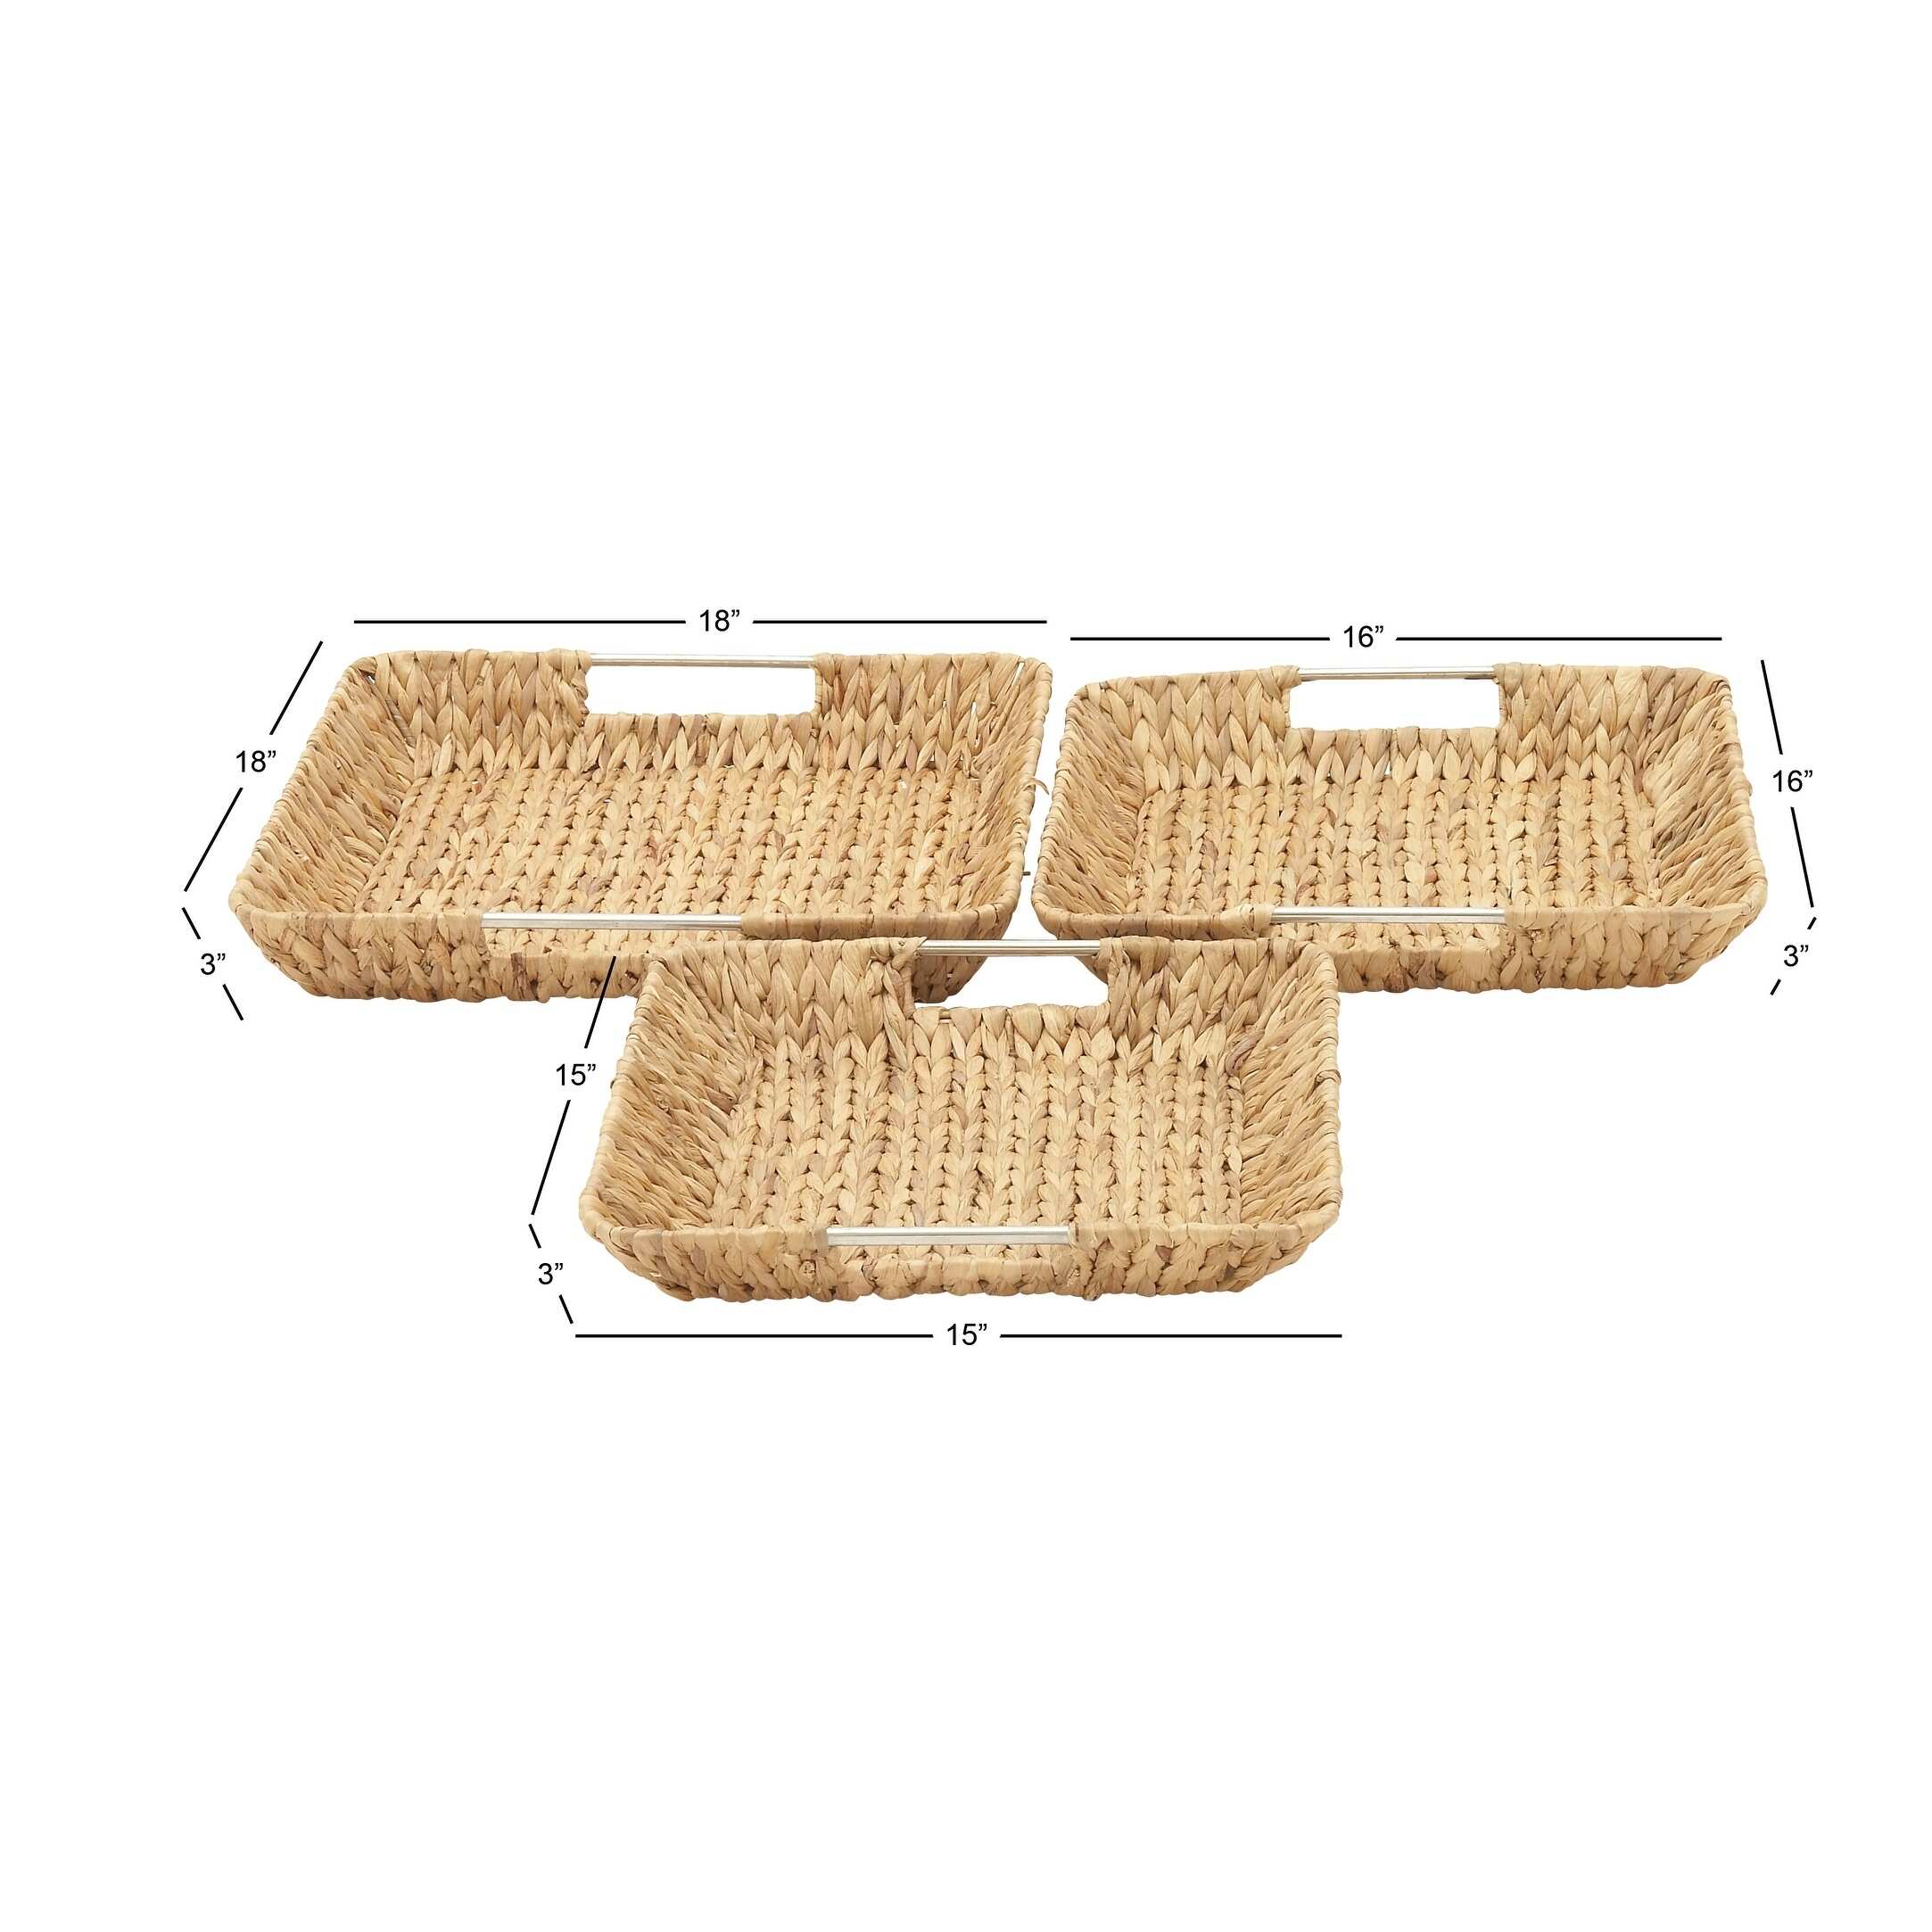 Tan Dried Plant Material Contemporary Tray (Set of 3)